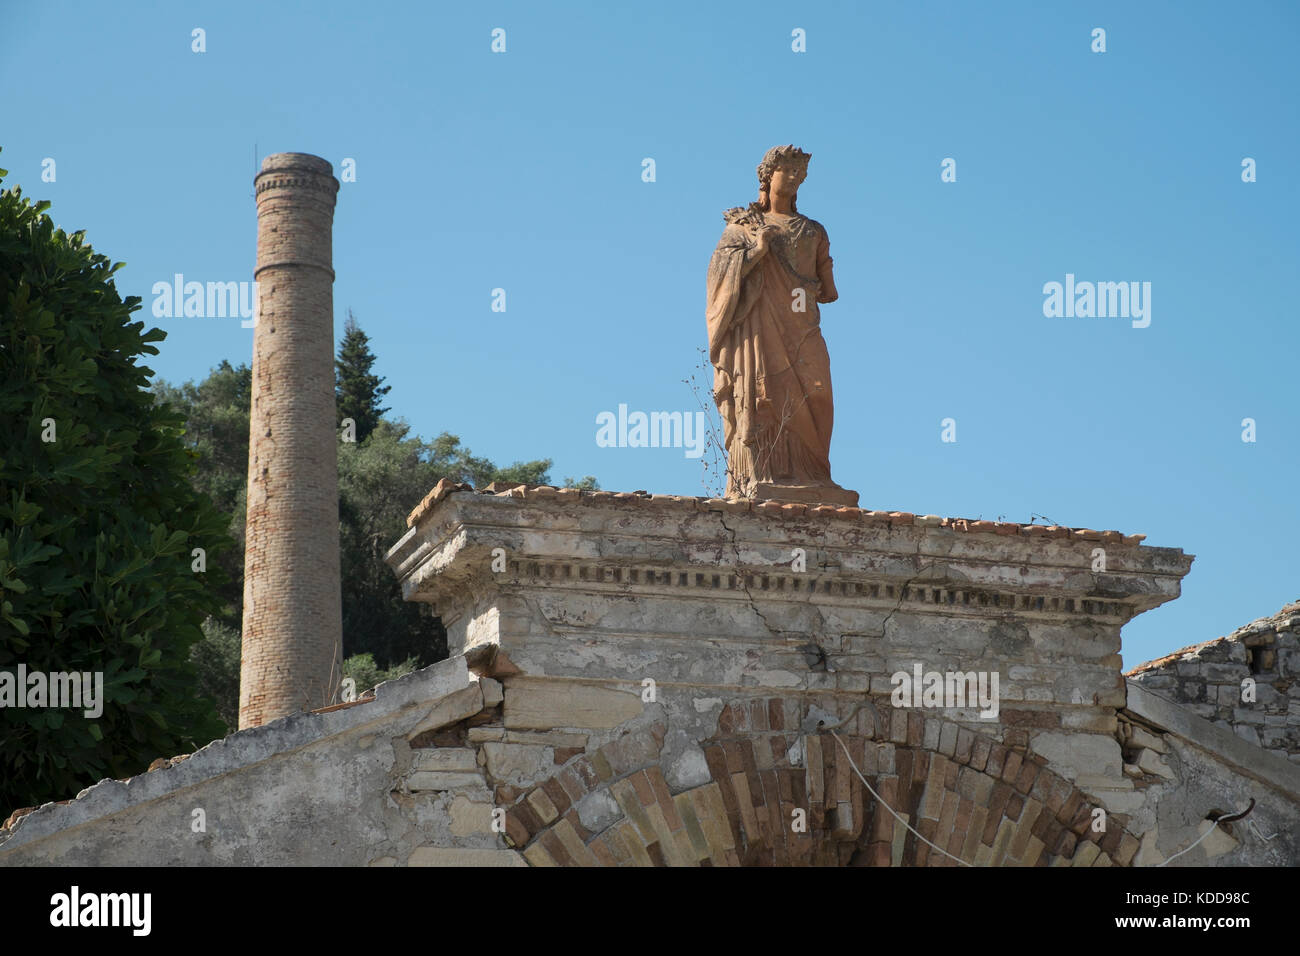 The Ruins of an old olive oil soap factory, Aphrodite and chimney, Loggos, Paxos, Greece Stock Photo